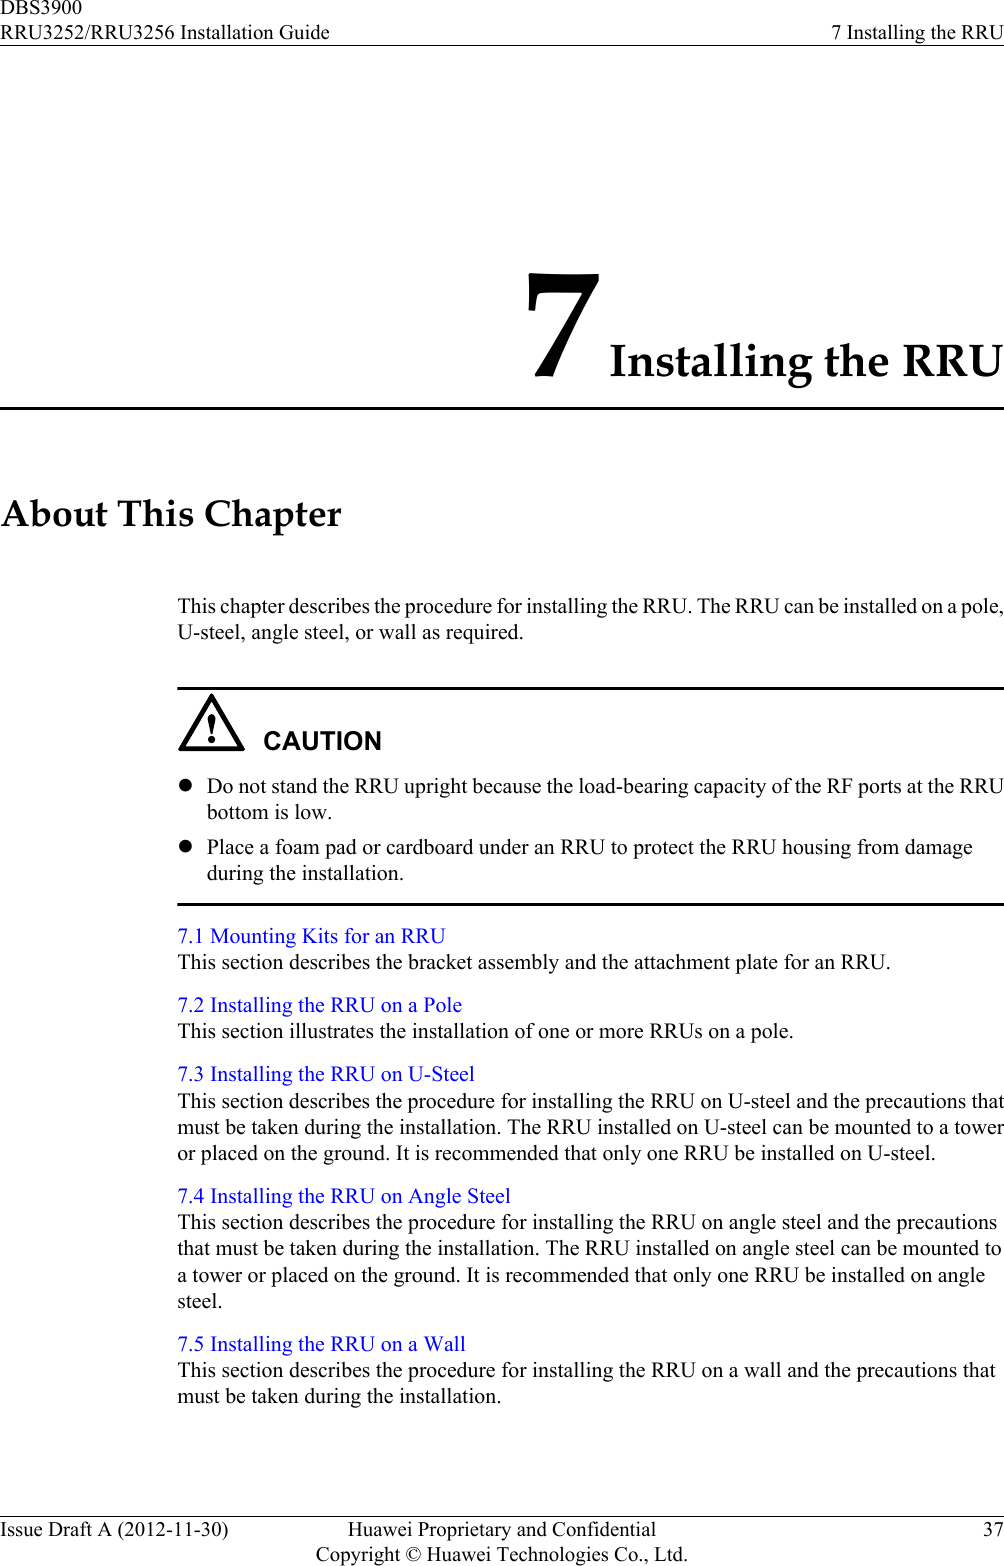 7 Installing the RRUAbout This ChapterThis chapter describes the procedure for installing the RRU. The RRU can be installed on a pole,U-steel, angle steel, or wall as required.CAUTIONlDo not stand the RRU upright because the load-bearing capacity of the RF ports at the RRUbottom is low.lPlace a foam pad or cardboard under an RRU to protect the RRU housing from damageduring the installation.7.1 Mounting Kits for an RRUThis section describes the bracket assembly and the attachment plate for an RRU.7.2 Installing the RRU on a PoleThis section illustrates the installation of one or more RRUs on a pole.7.3 Installing the RRU on U-SteelThis section describes the procedure for installing the RRU on U-steel and the precautions thatmust be taken during the installation. The RRU installed on U-steel can be mounted to a toweror placed on the ground. It is recommended that only one RRU be installed on U-steel.7.4 Installing the RRU on Angle SteelThis section describes the procedure for installing the RRU on angle steel and the precautionsthat must be taken during the installation. The RRU installed on angle steel can be mounted toa tower or placed on the ground. It is recommended that only one RRU be installed on anglesteel.7.5 Installing the RRU on a WallThis section describes the procedure for installing the RRU on a wall and the precautions thatmust be taken during the installation.DBS3900RRU3252/RRU3256 Installation Guide 7 Installing the RRUIssue Draft A (2012-11-30) Huawei Proprietary and ConfidentialCopyright © Huawei Technologies Co., Ltd.37